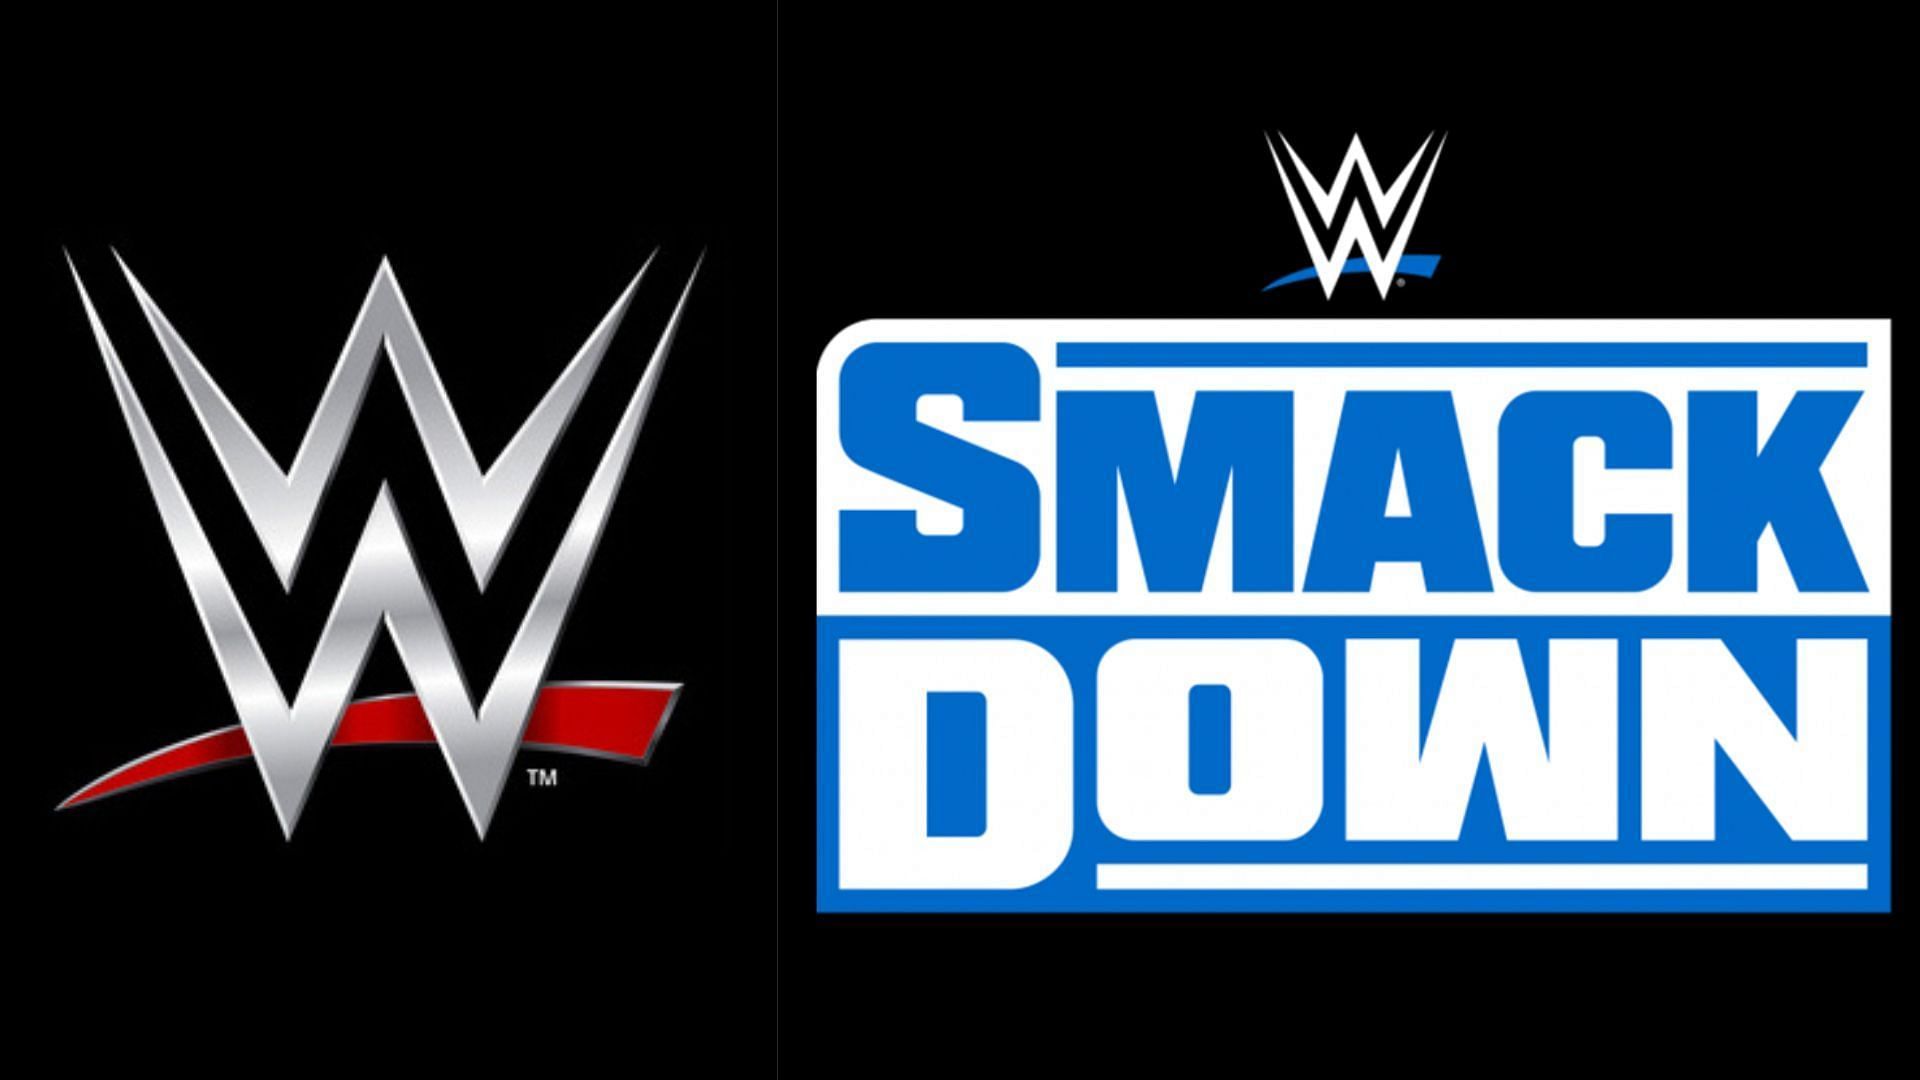 SmackDown aired live from San Antonio this past Friday.